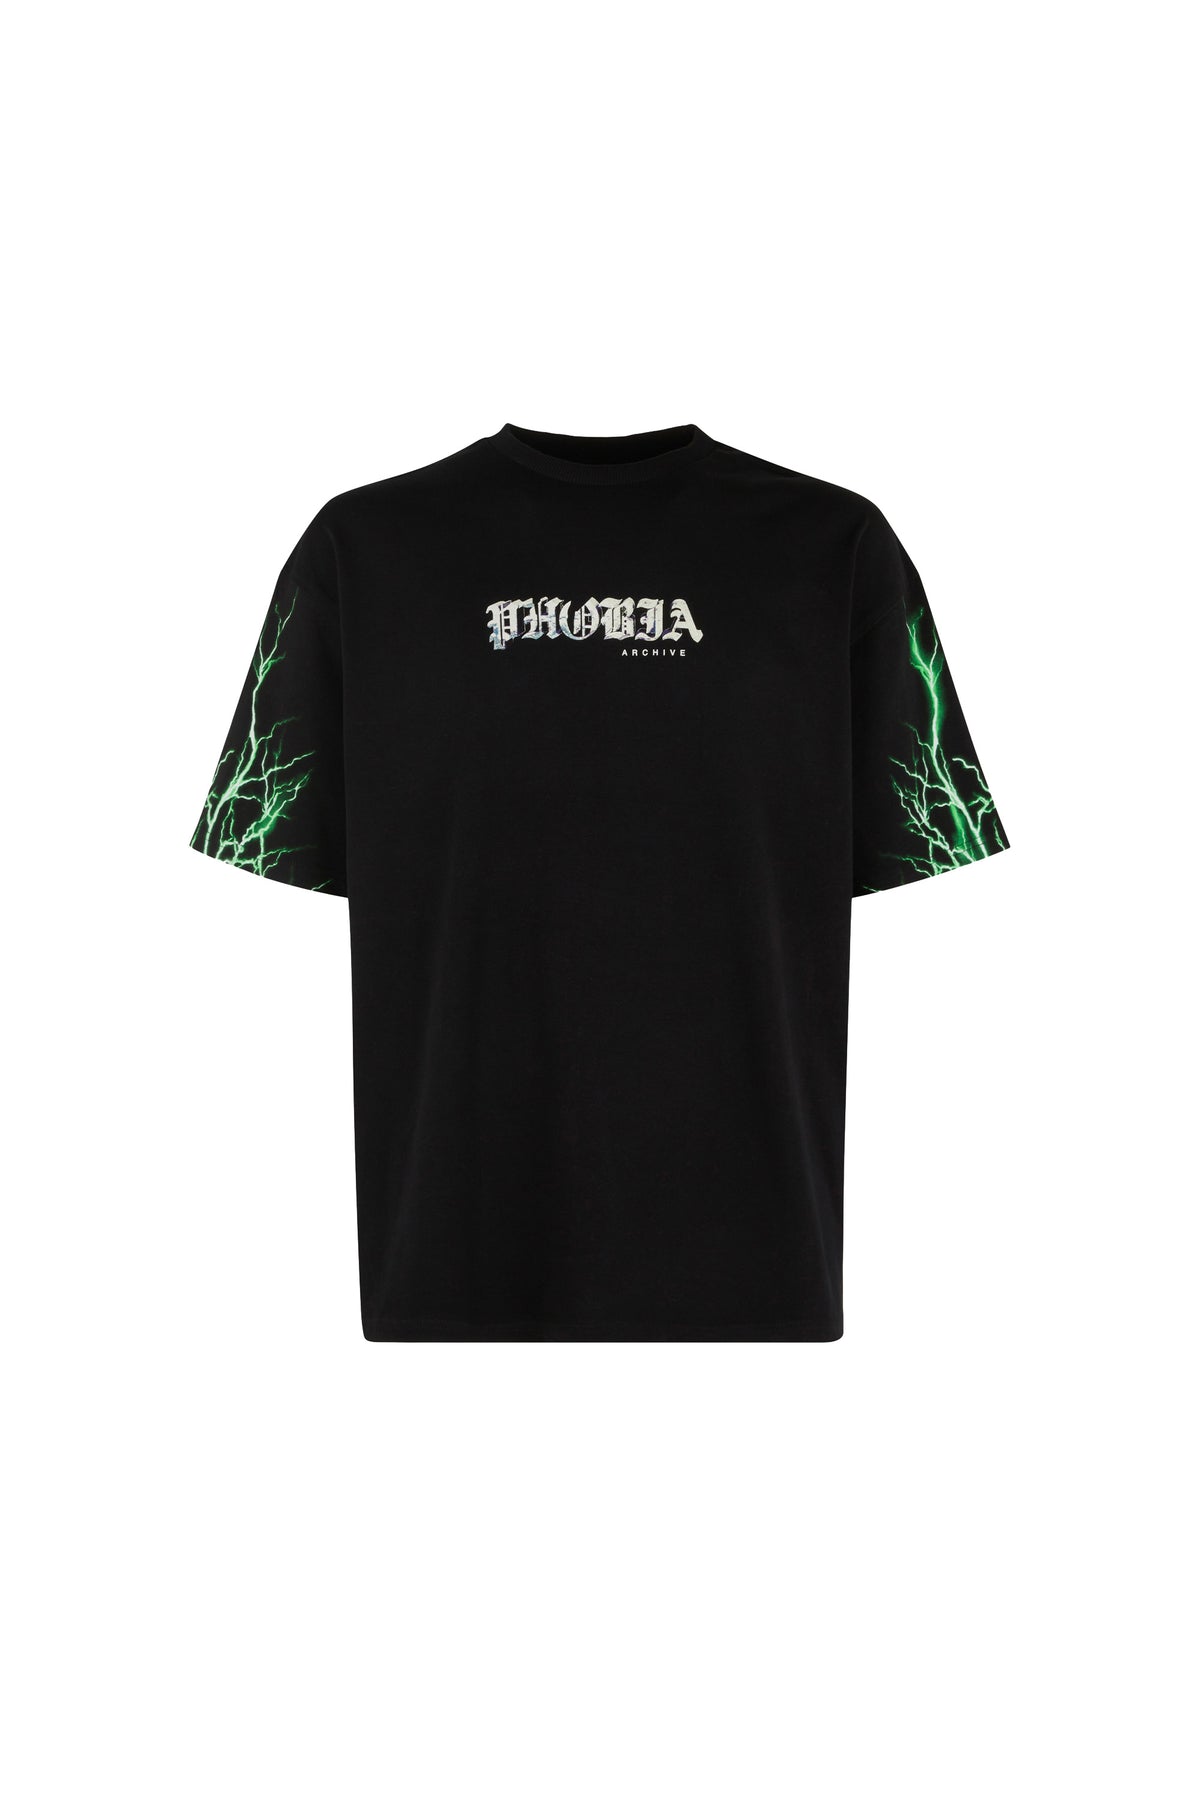 PHOBIA Black T-Shirt with Green lightning on sleeves